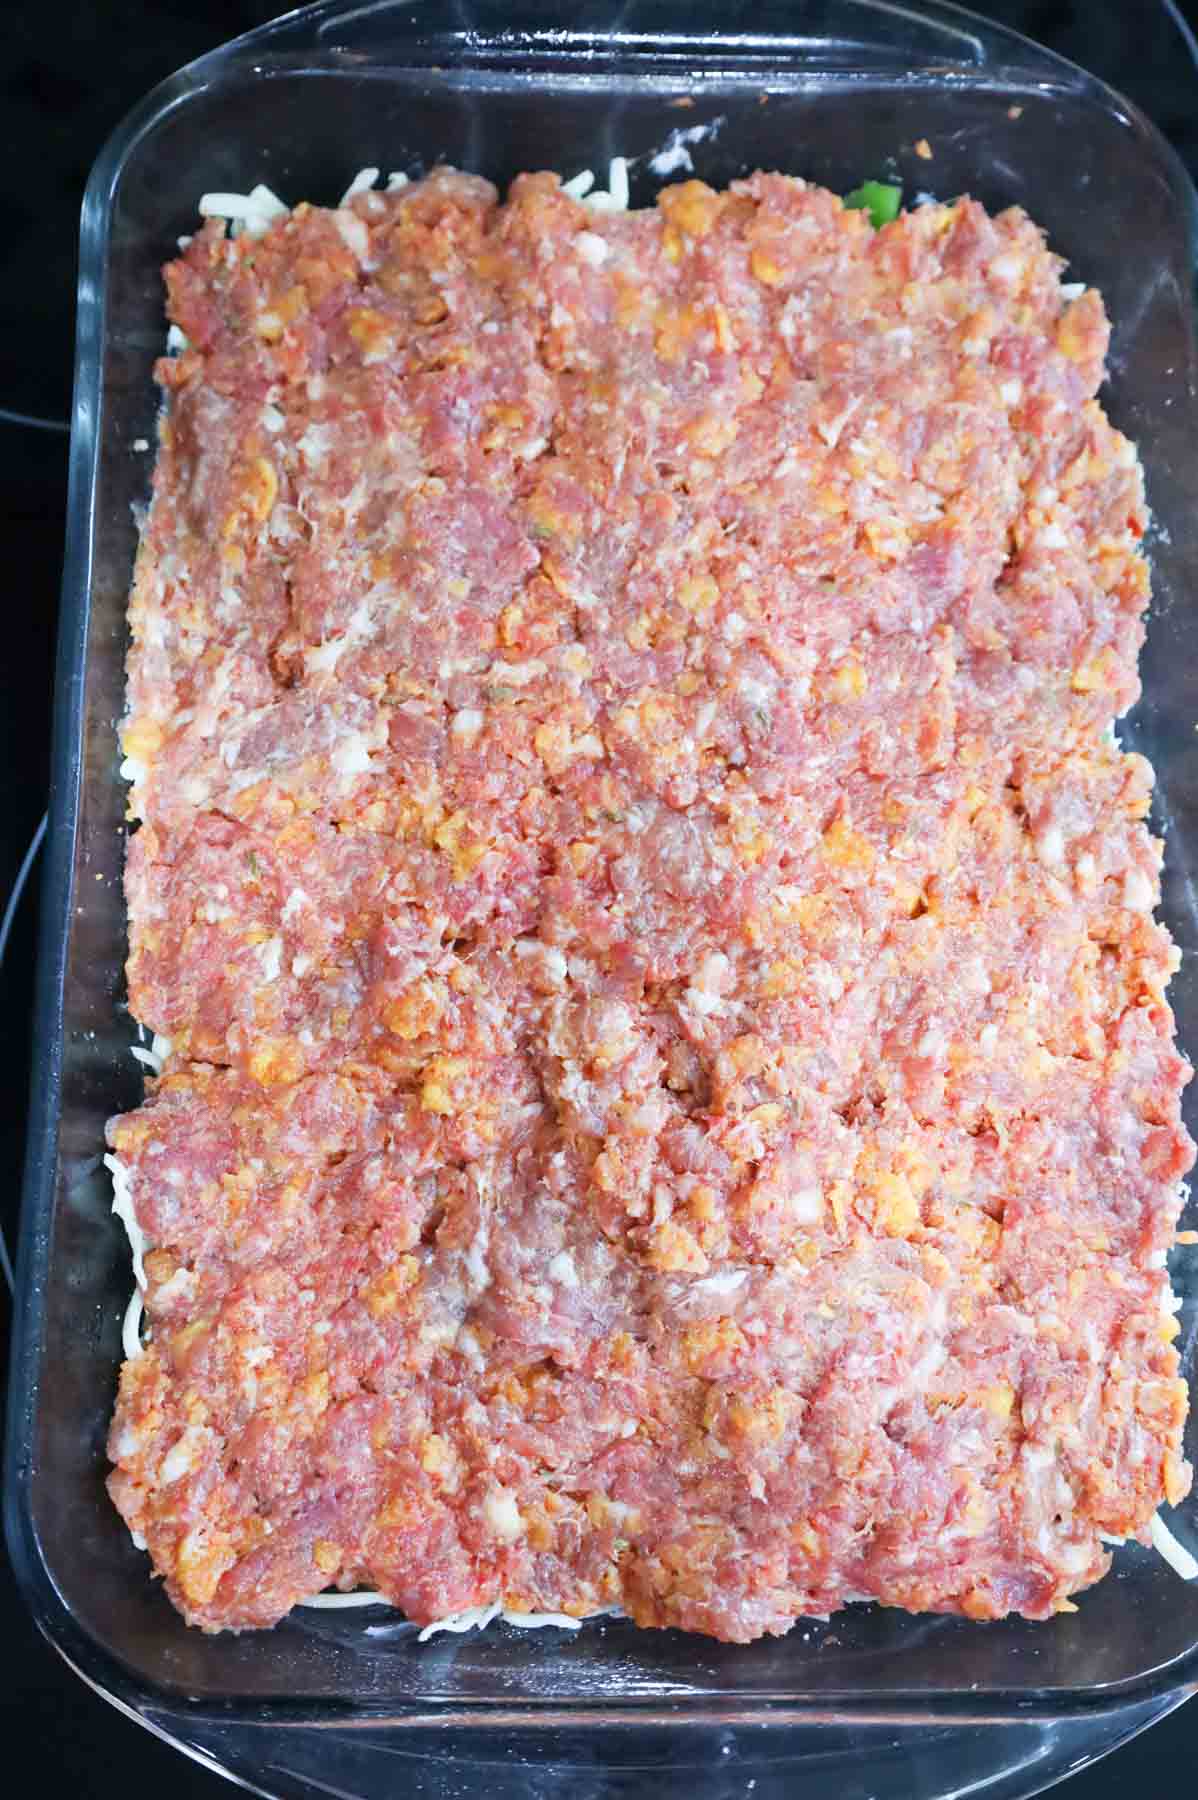 sausage and ground beef mixture forms the top layer of a meatloaf casserole in a baking dish